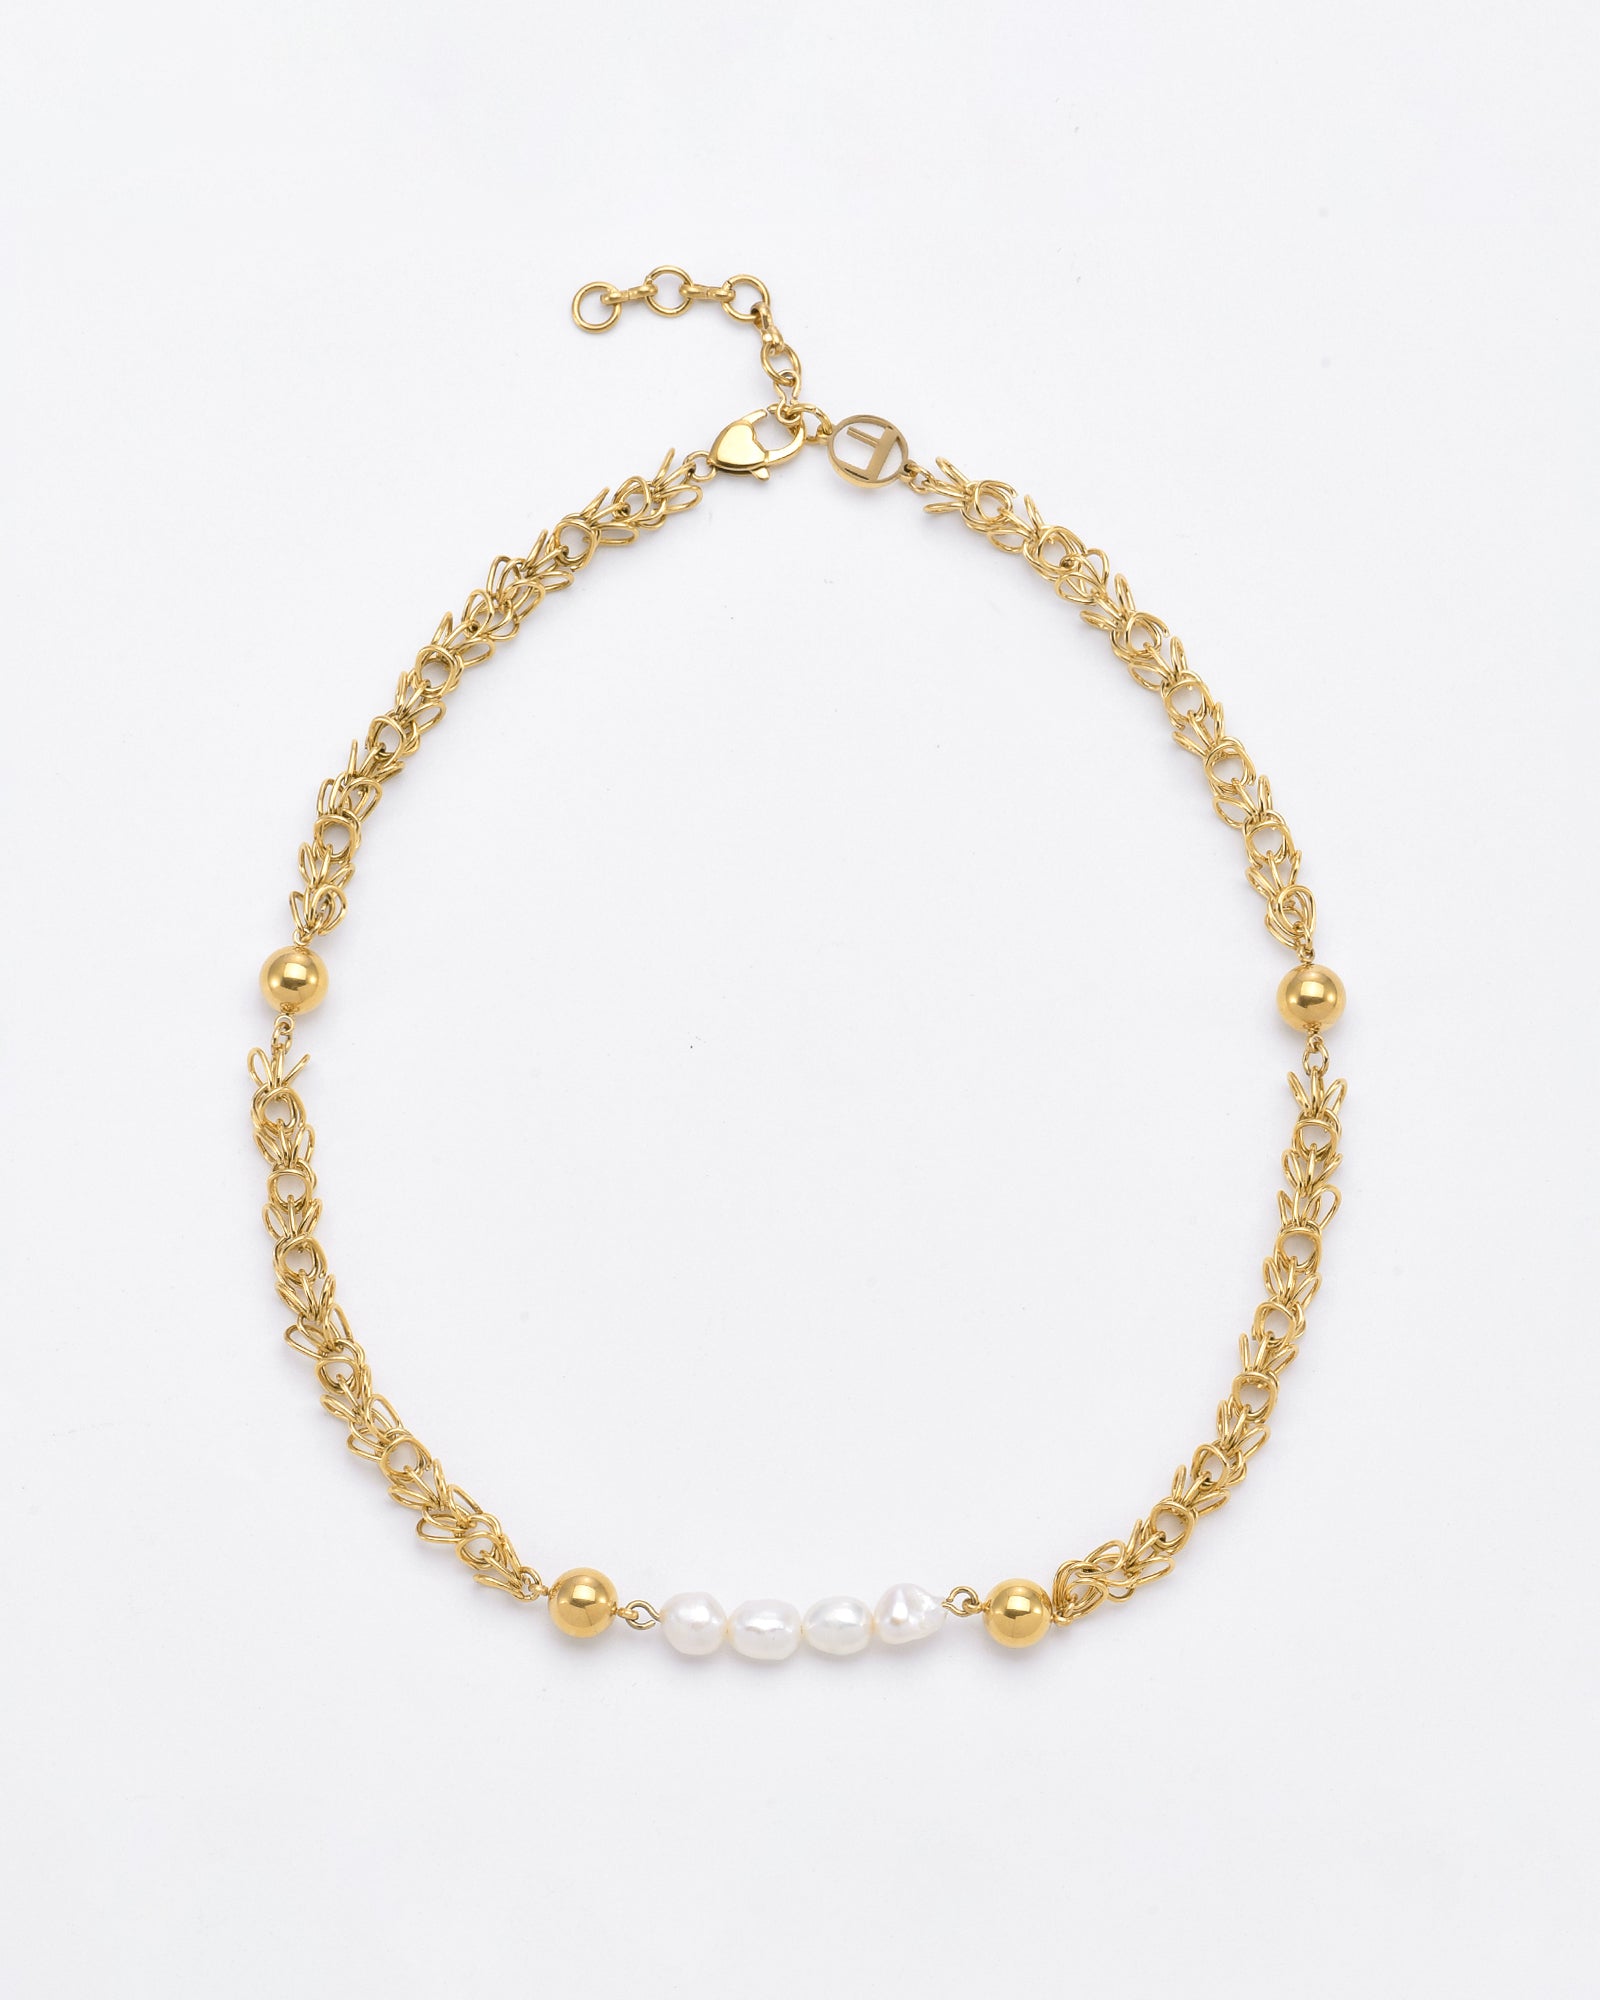 The For Art's Sake® Athena Necklace Gold is a delicate gold chain with an intricate leaf-like design, featuring alternating 24-karat gold plated beads and freshwater pearls at the center. It has an adjustable clasp closure against a plain white background.